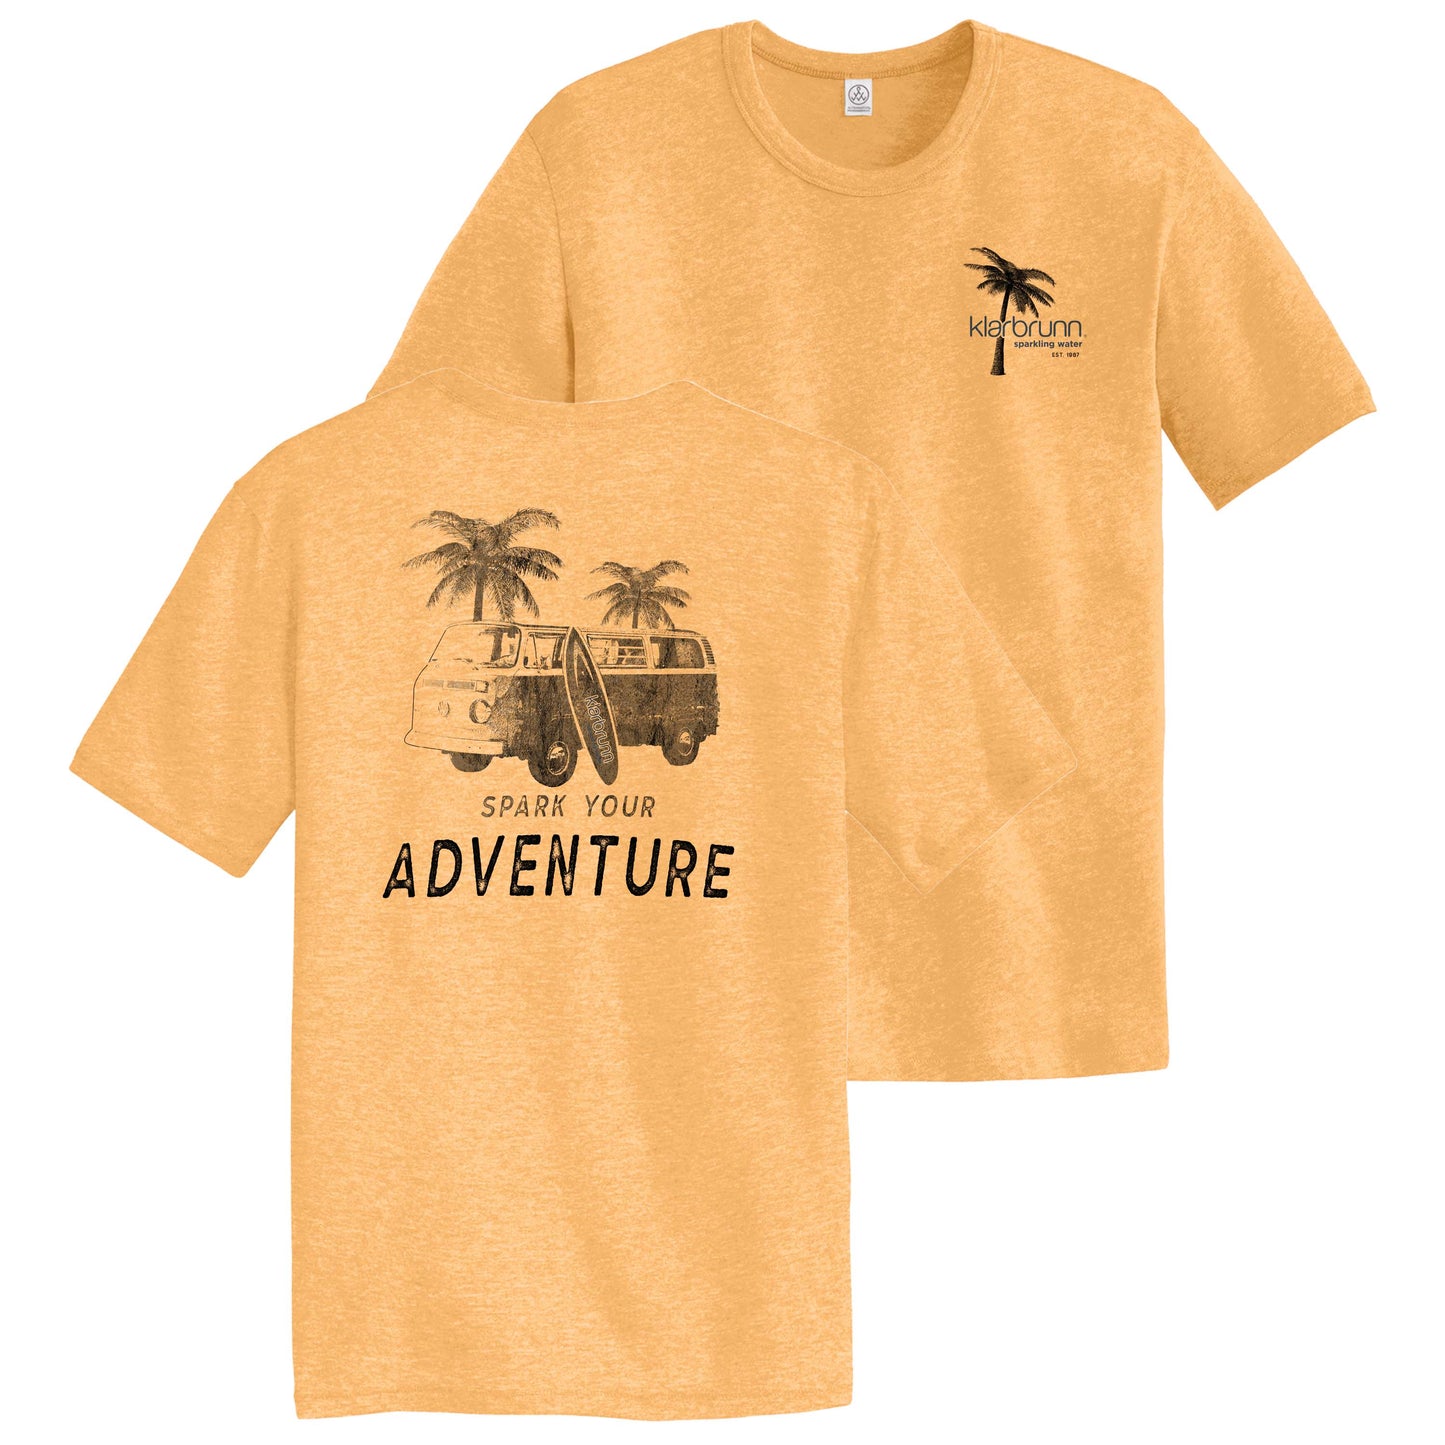 pale orange shirt. back design with van, palm trees and words "spark your adventure". front has "klarbrunn" in front of palm tree